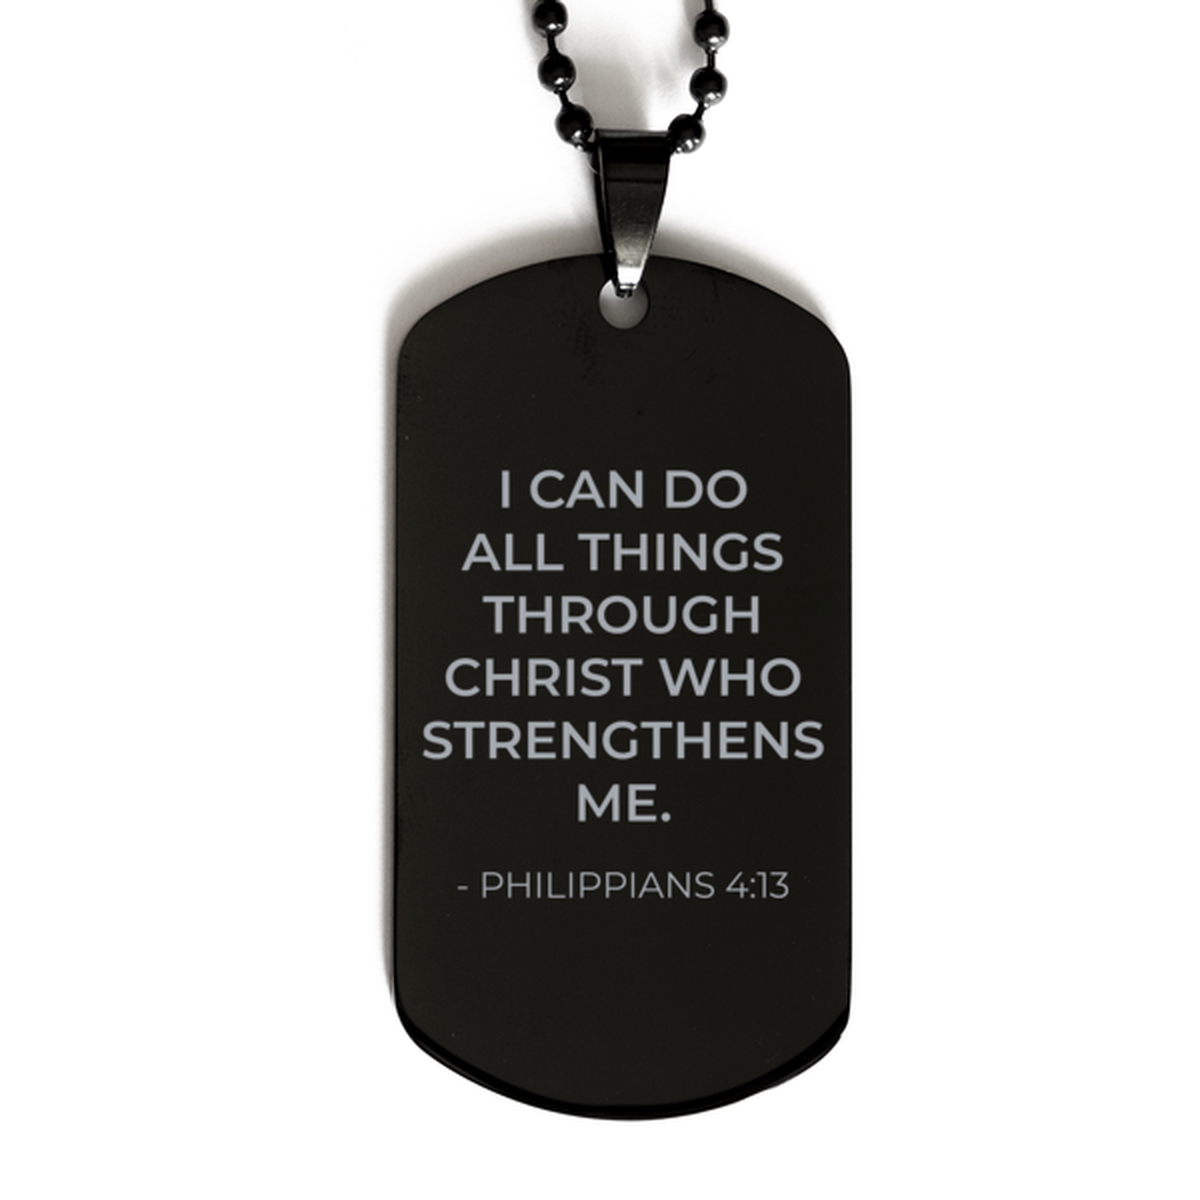 Bible Verse Black Dog Tag, Philippians 4:13 I Can Do All Things Through Christ Who, Christian Inspirational Necklace Gifts For Men Women